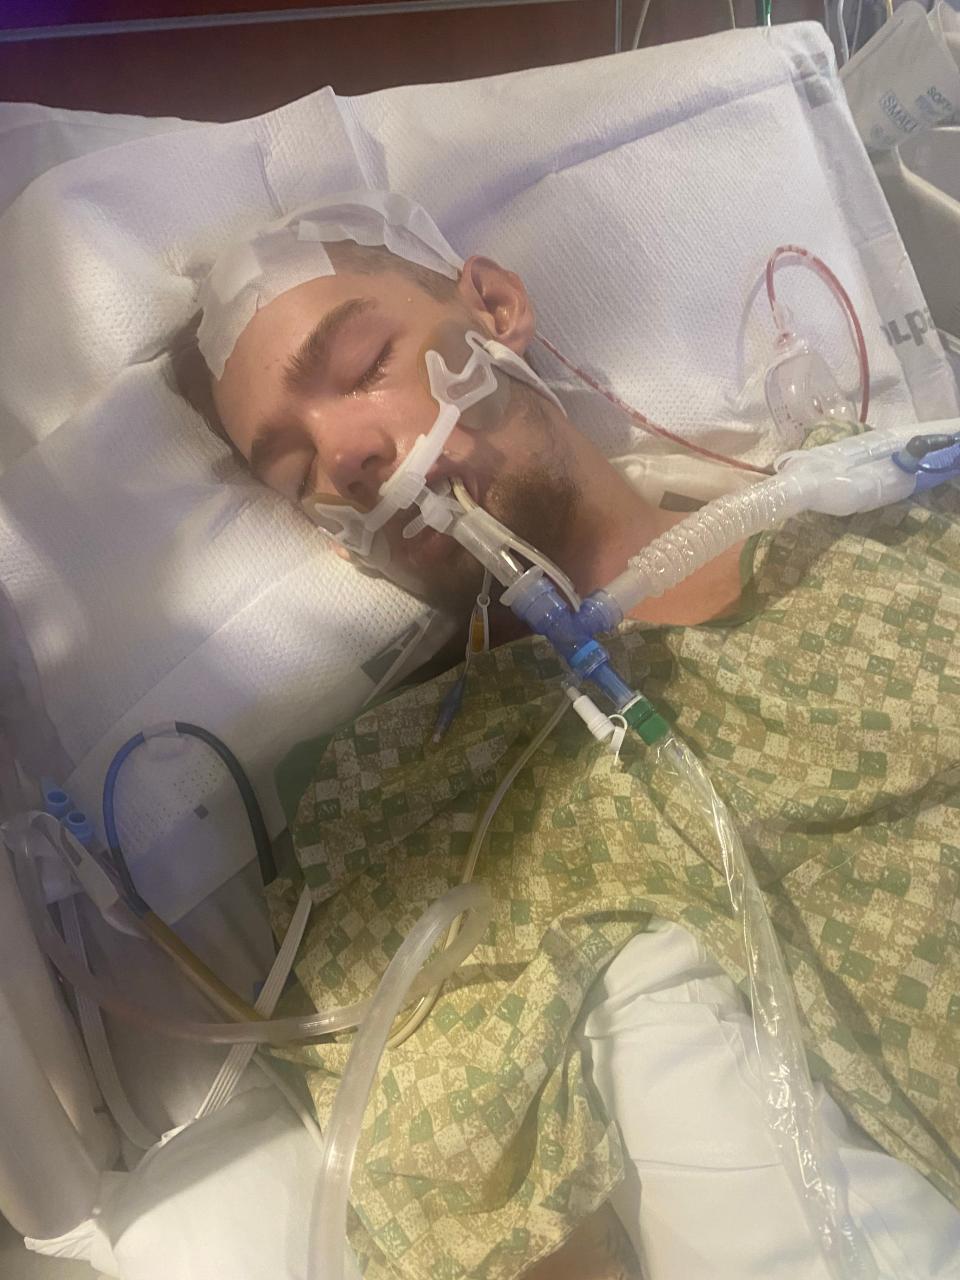 Matthew Hallahan, 21, had an intense bacterial infection in his brain that caused a stroke and seizures.